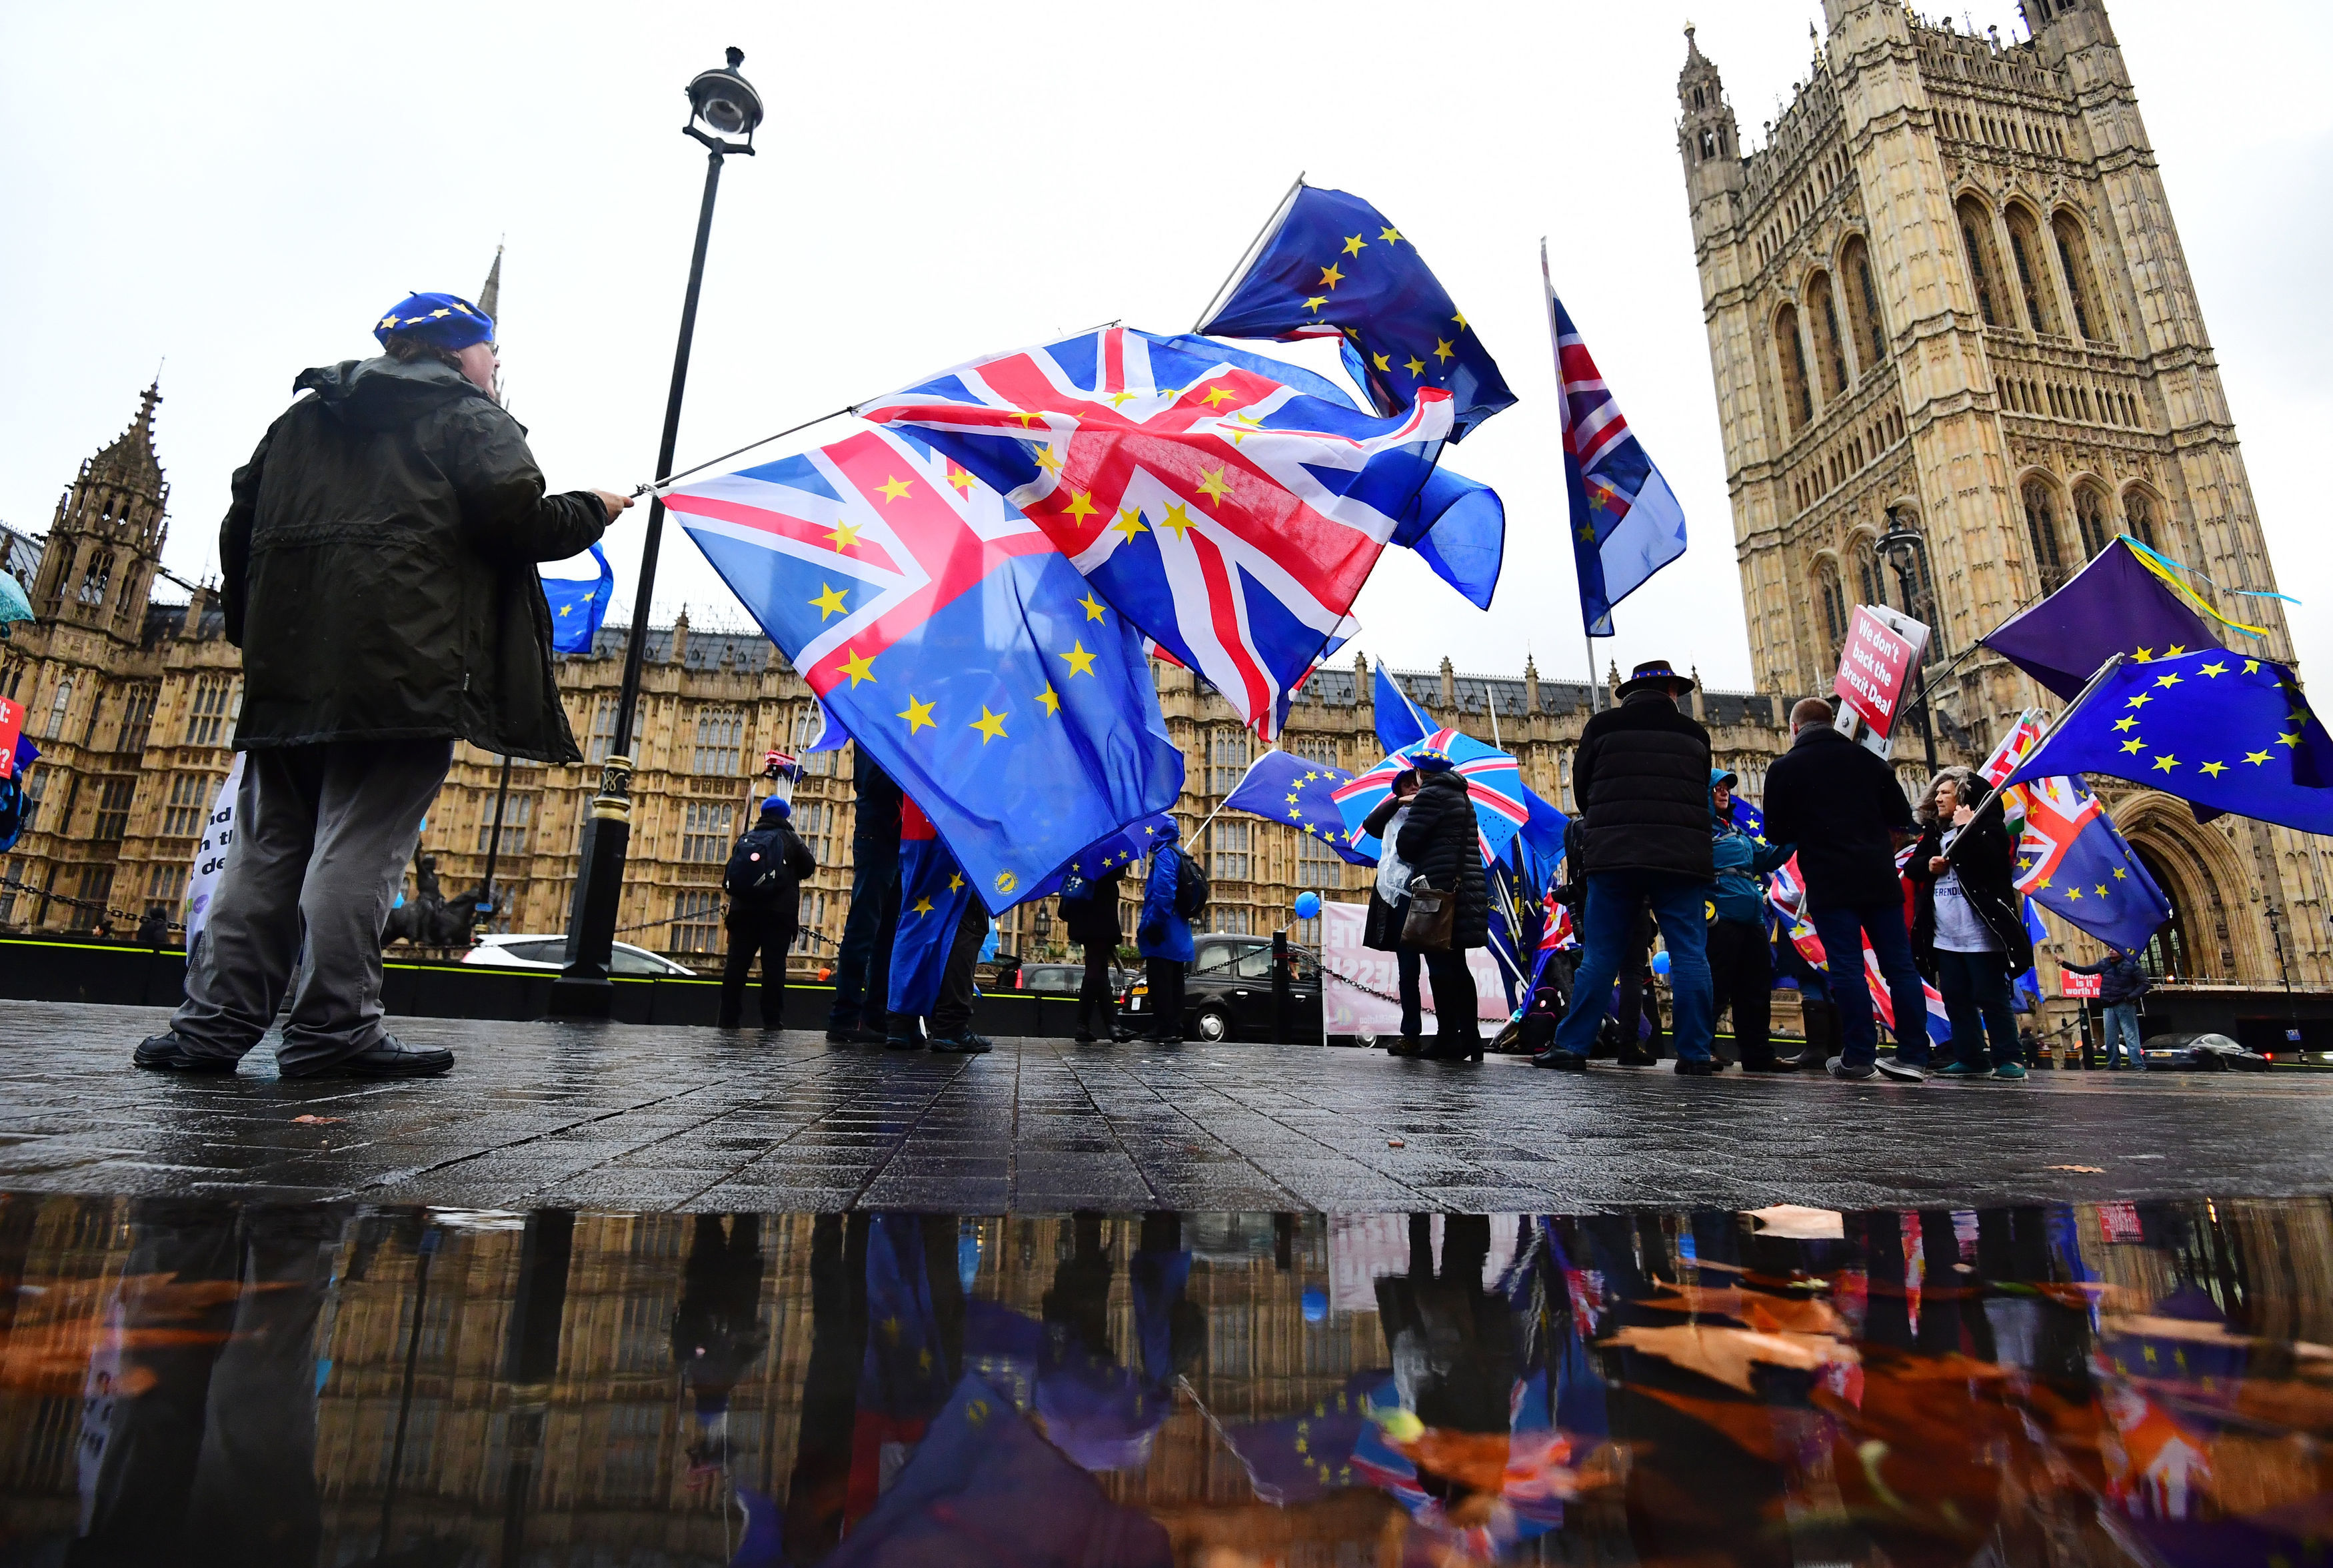 Anti-Brexit campaigners with Union and European Union flags outside the House of Commons in London.